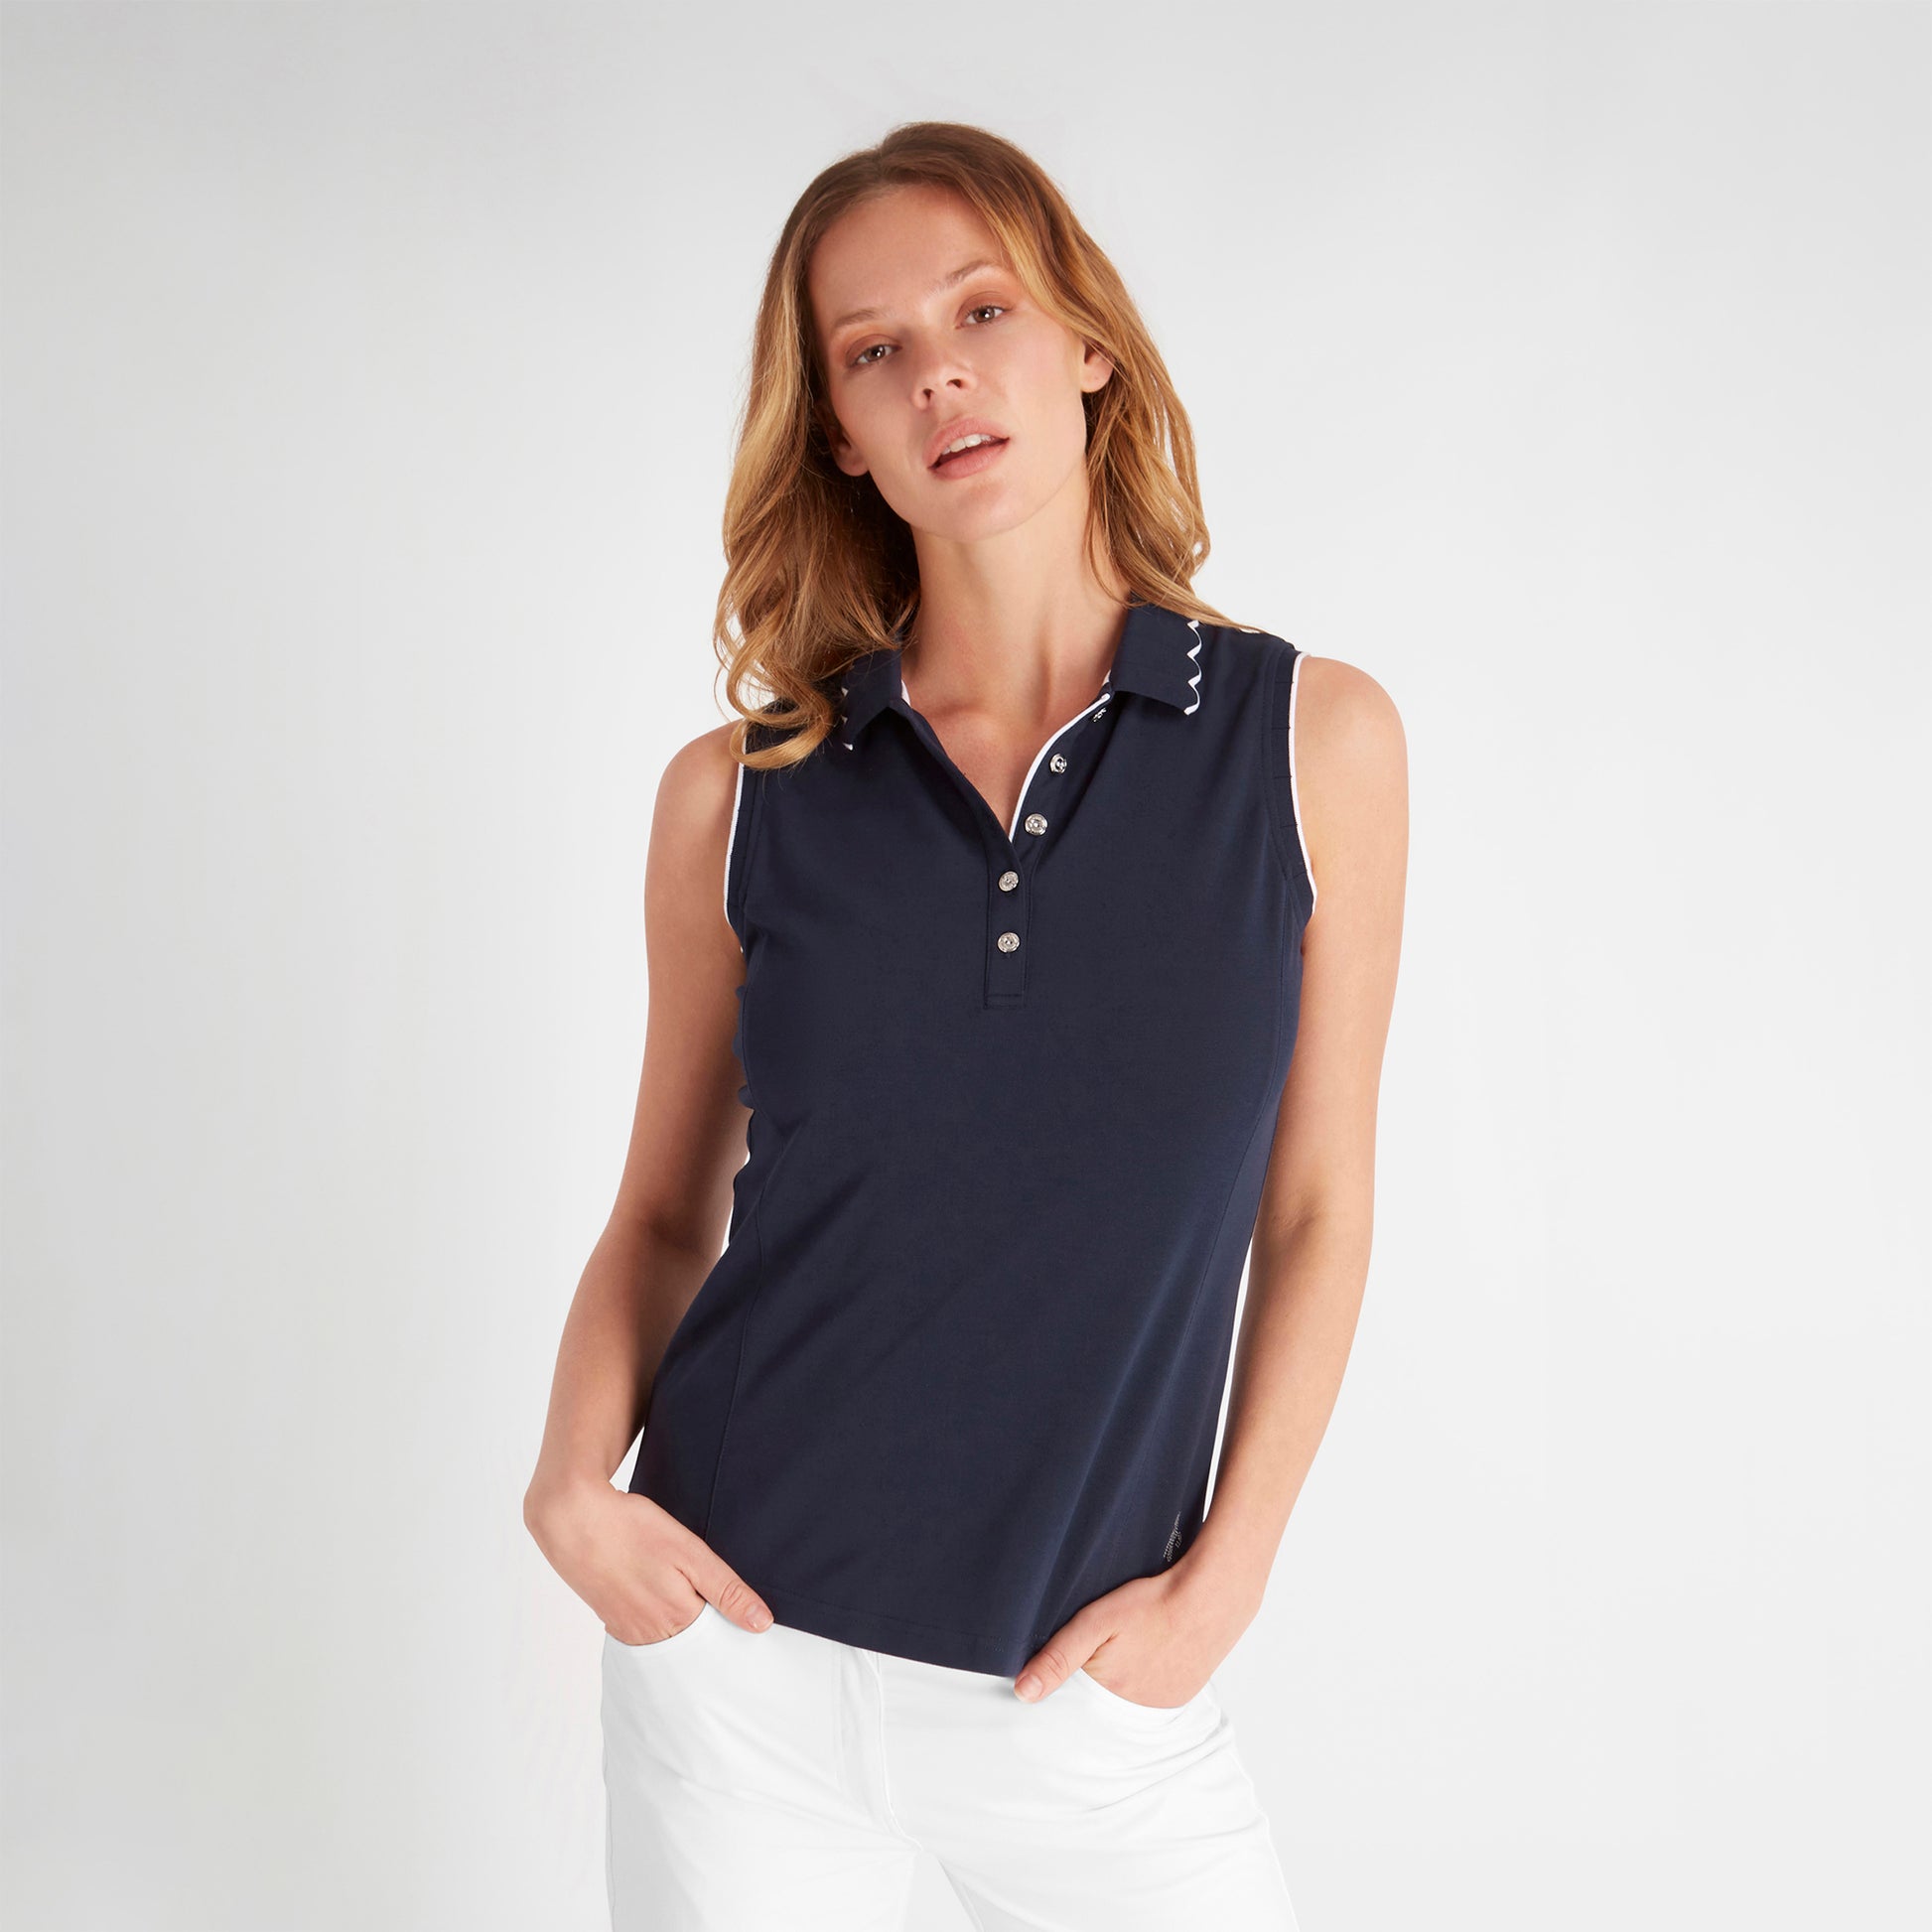 Green Lamb Ladies Sleeveless Polo with Scalloped Collar in Navy